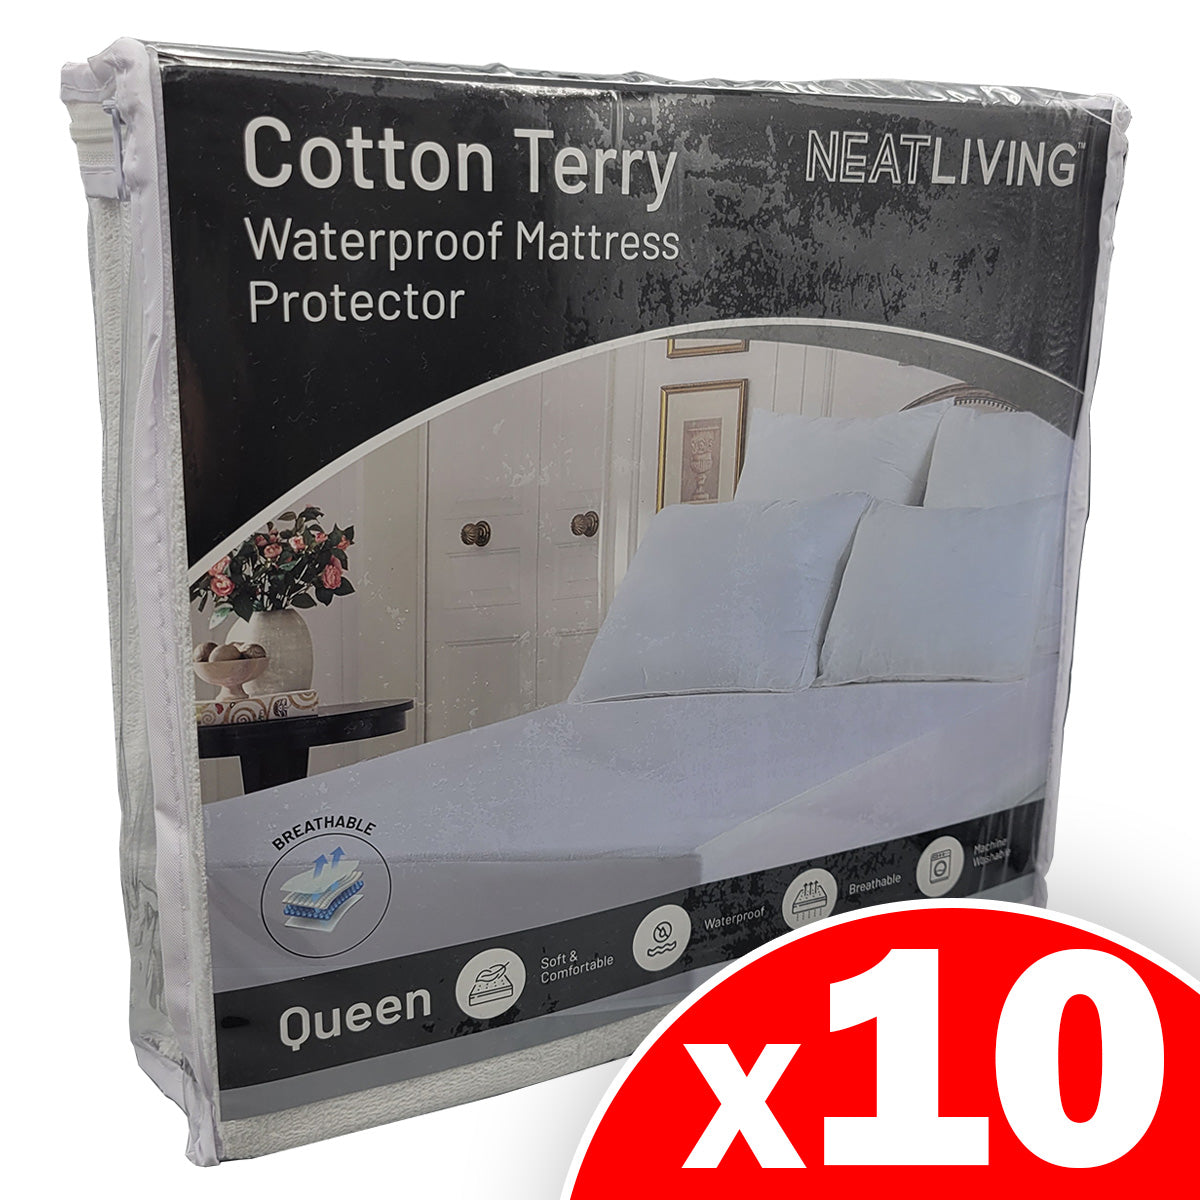 Neat-Living Cotton Terry Waterproof Mattress Protector, Assorted Sizes, 10 Pack